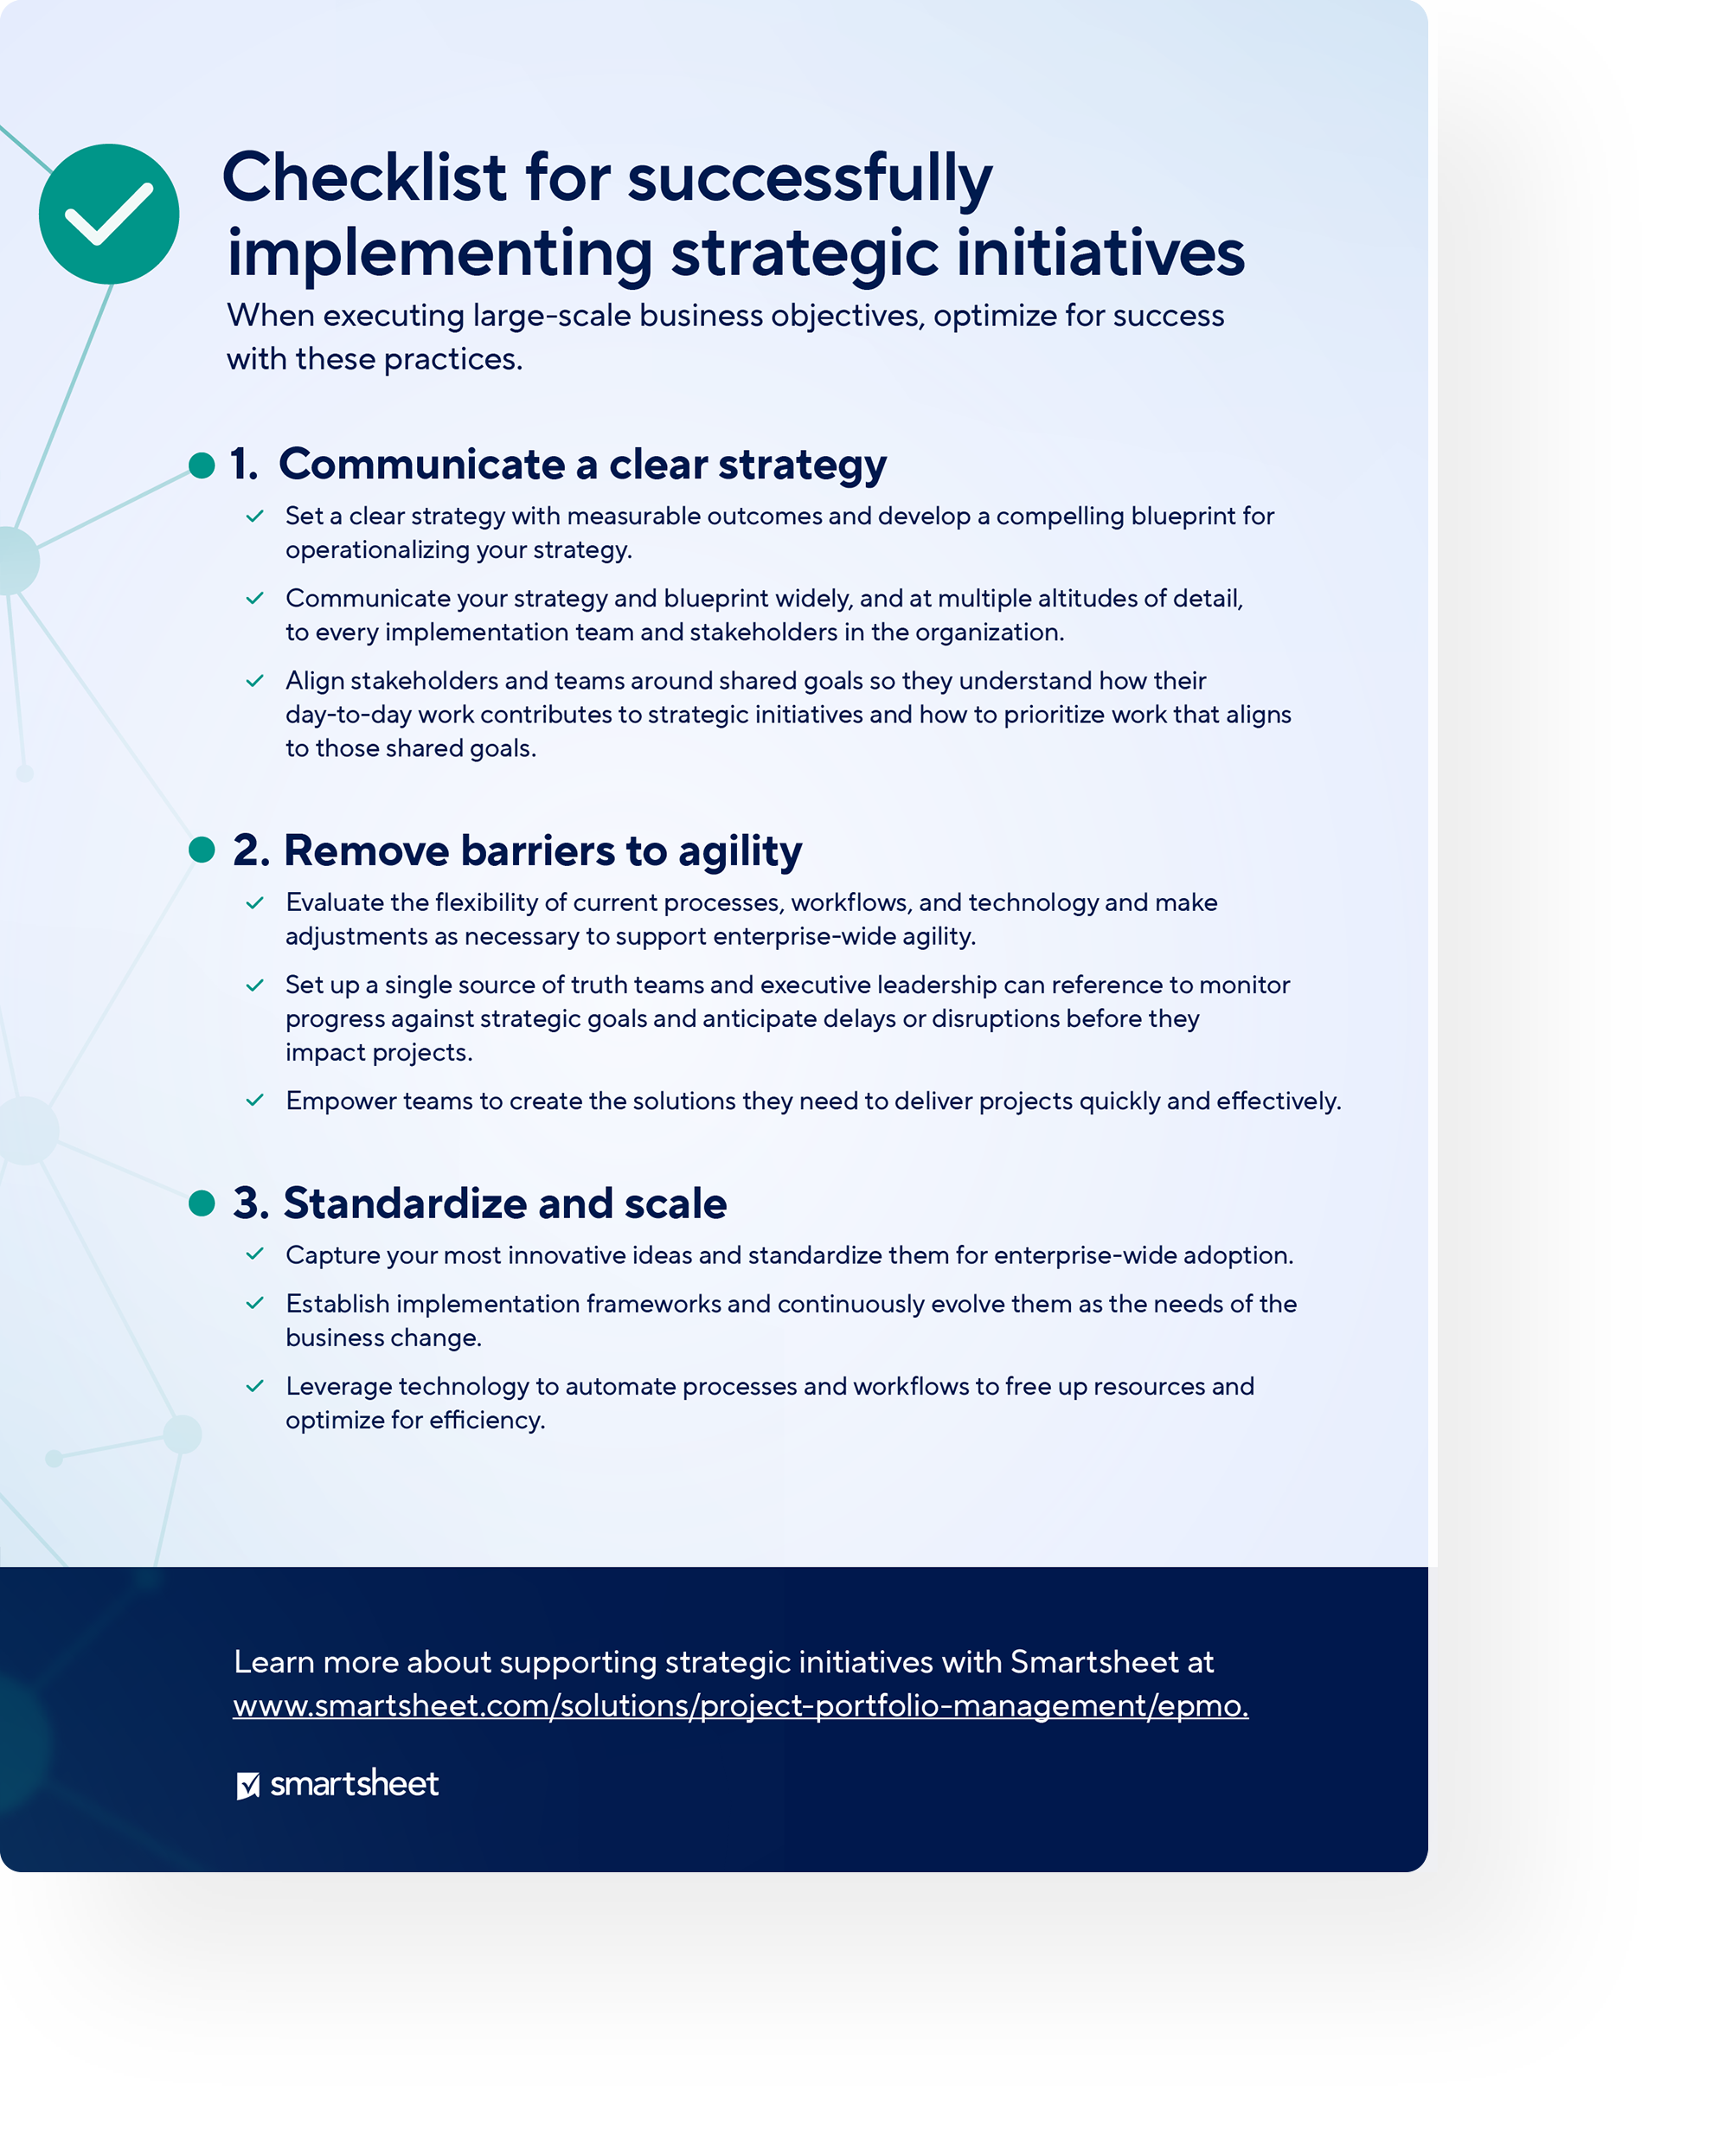 Checklist for successfully implementing strategic initiatives